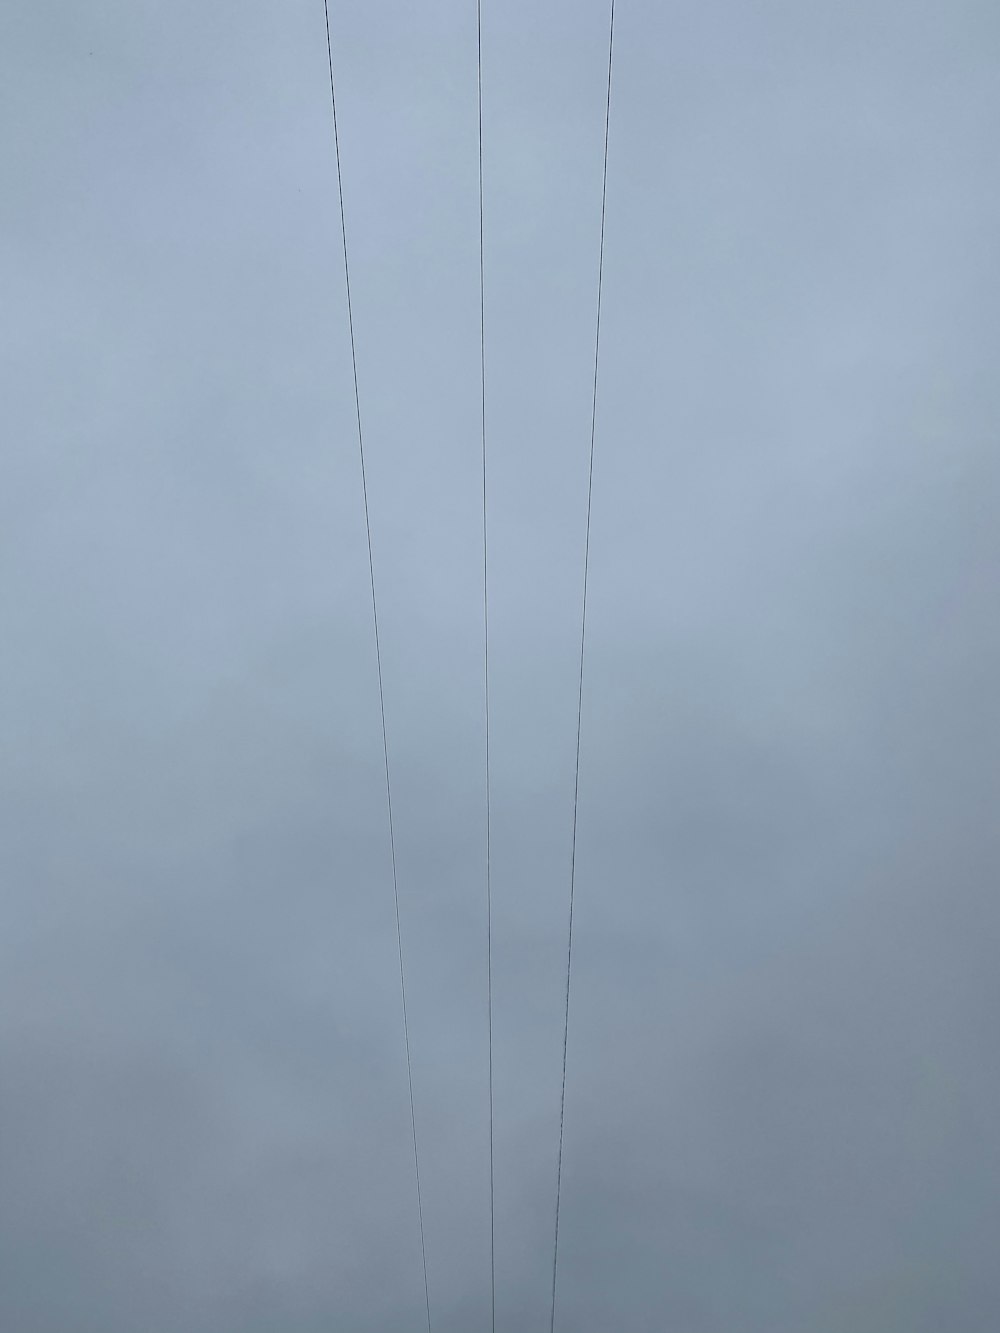 black coated wire under gray clouds